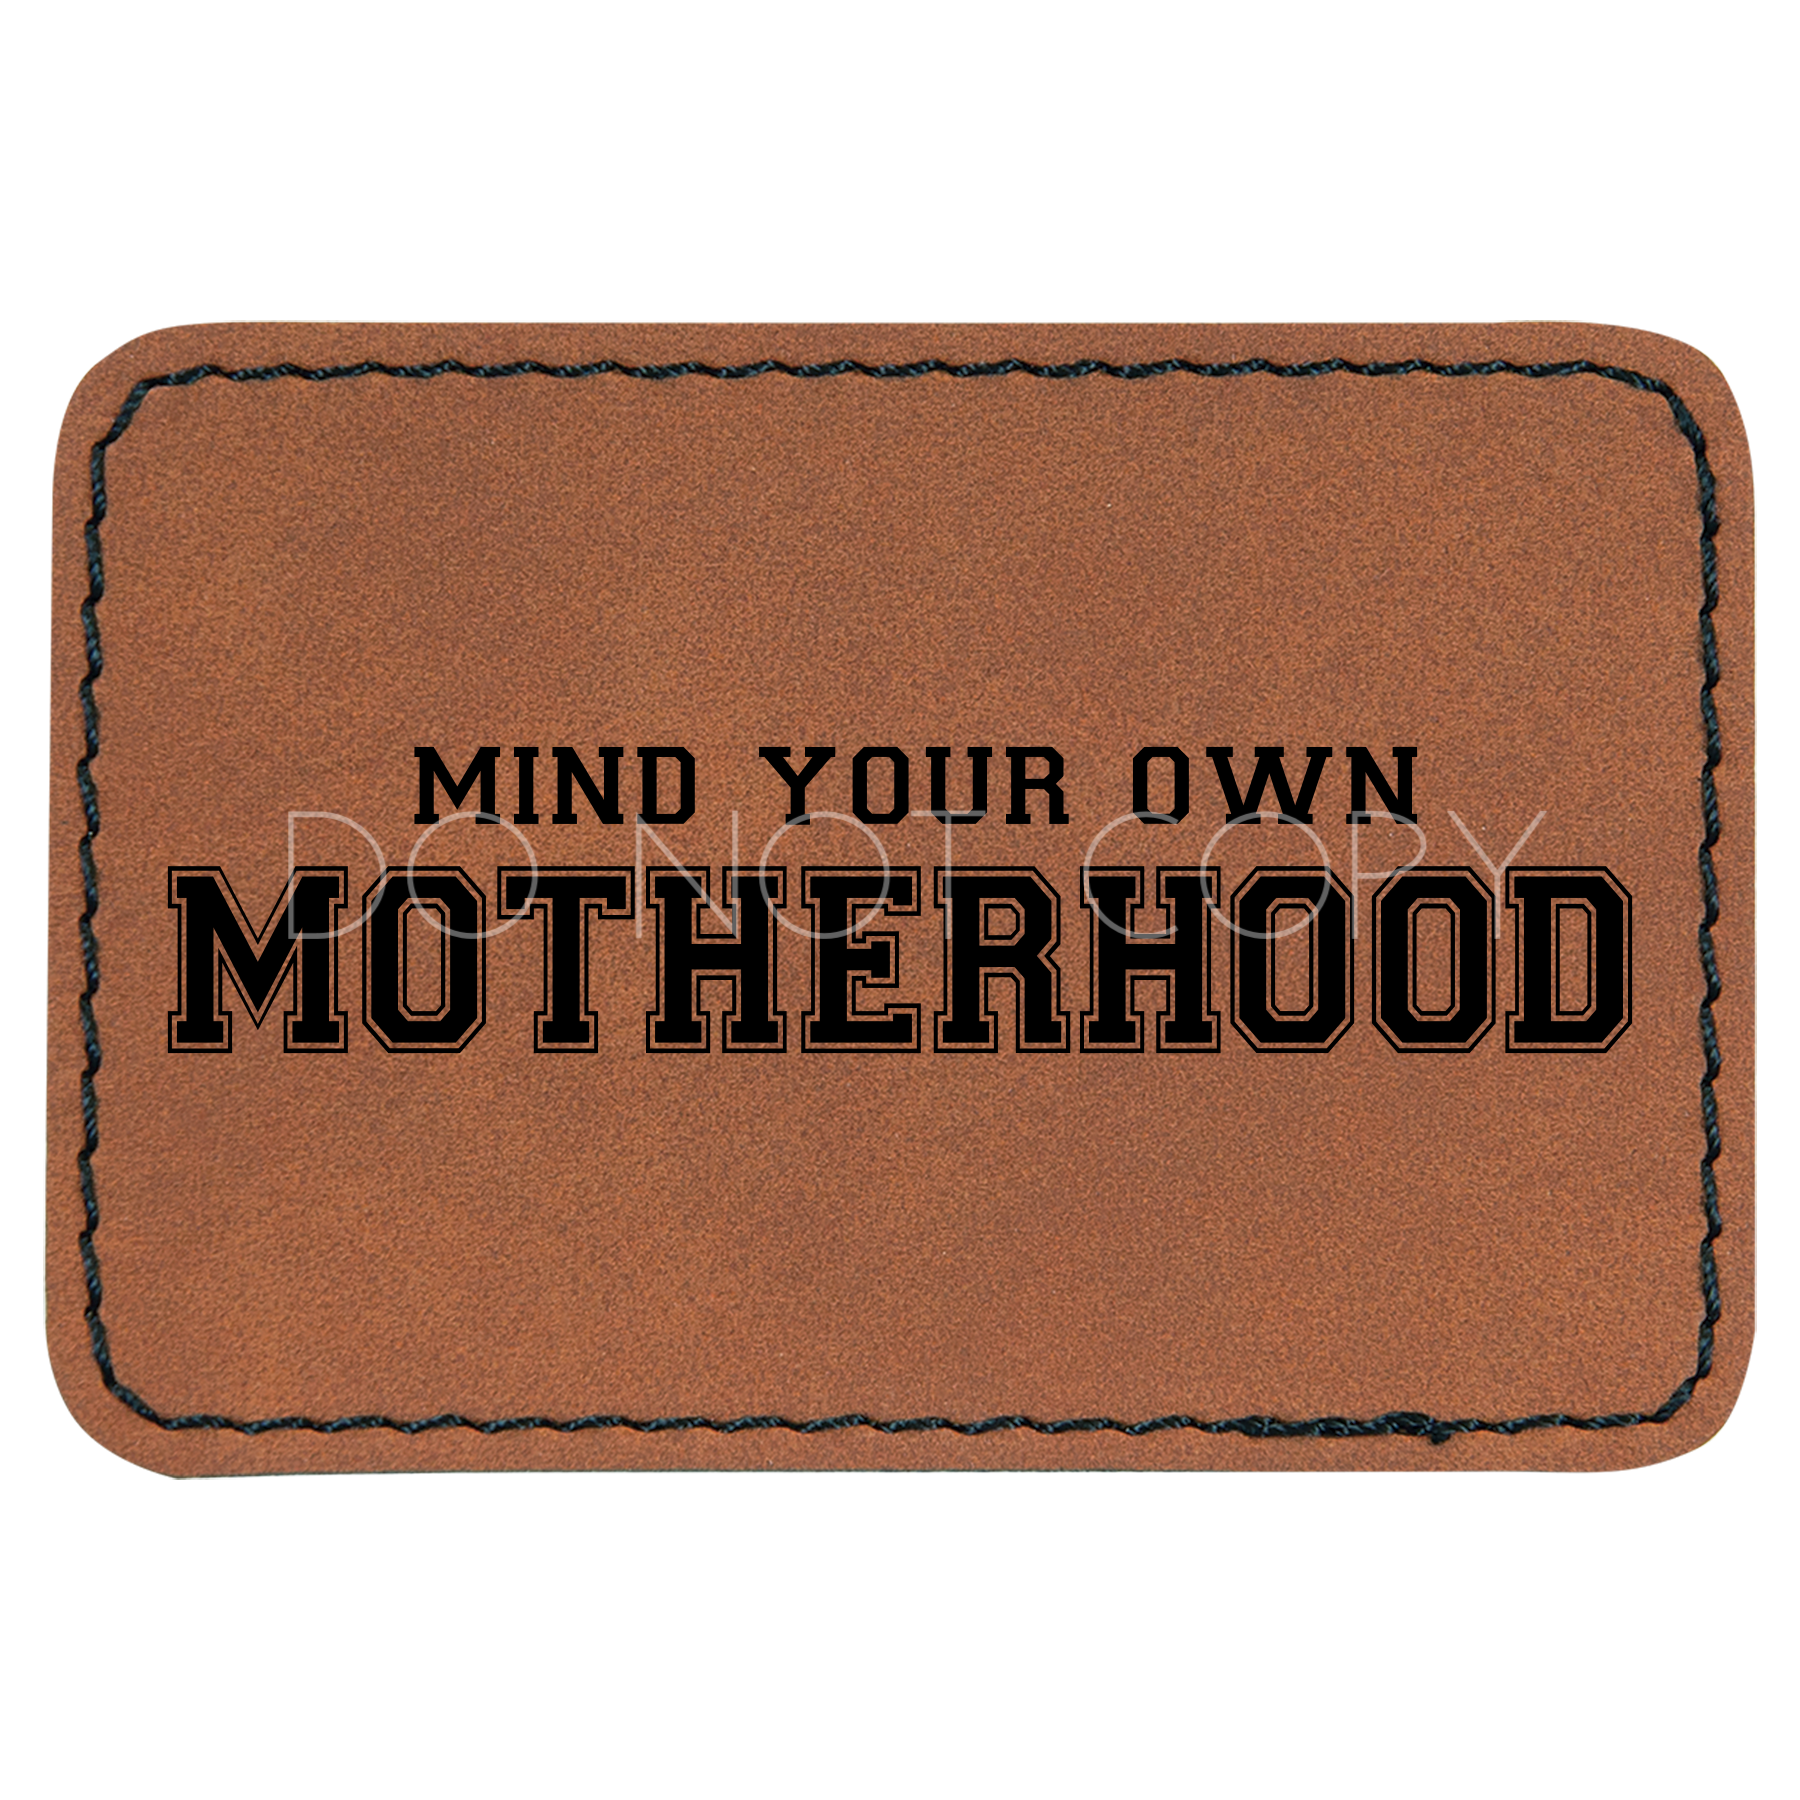 Mind Your Own Motherhood Patch